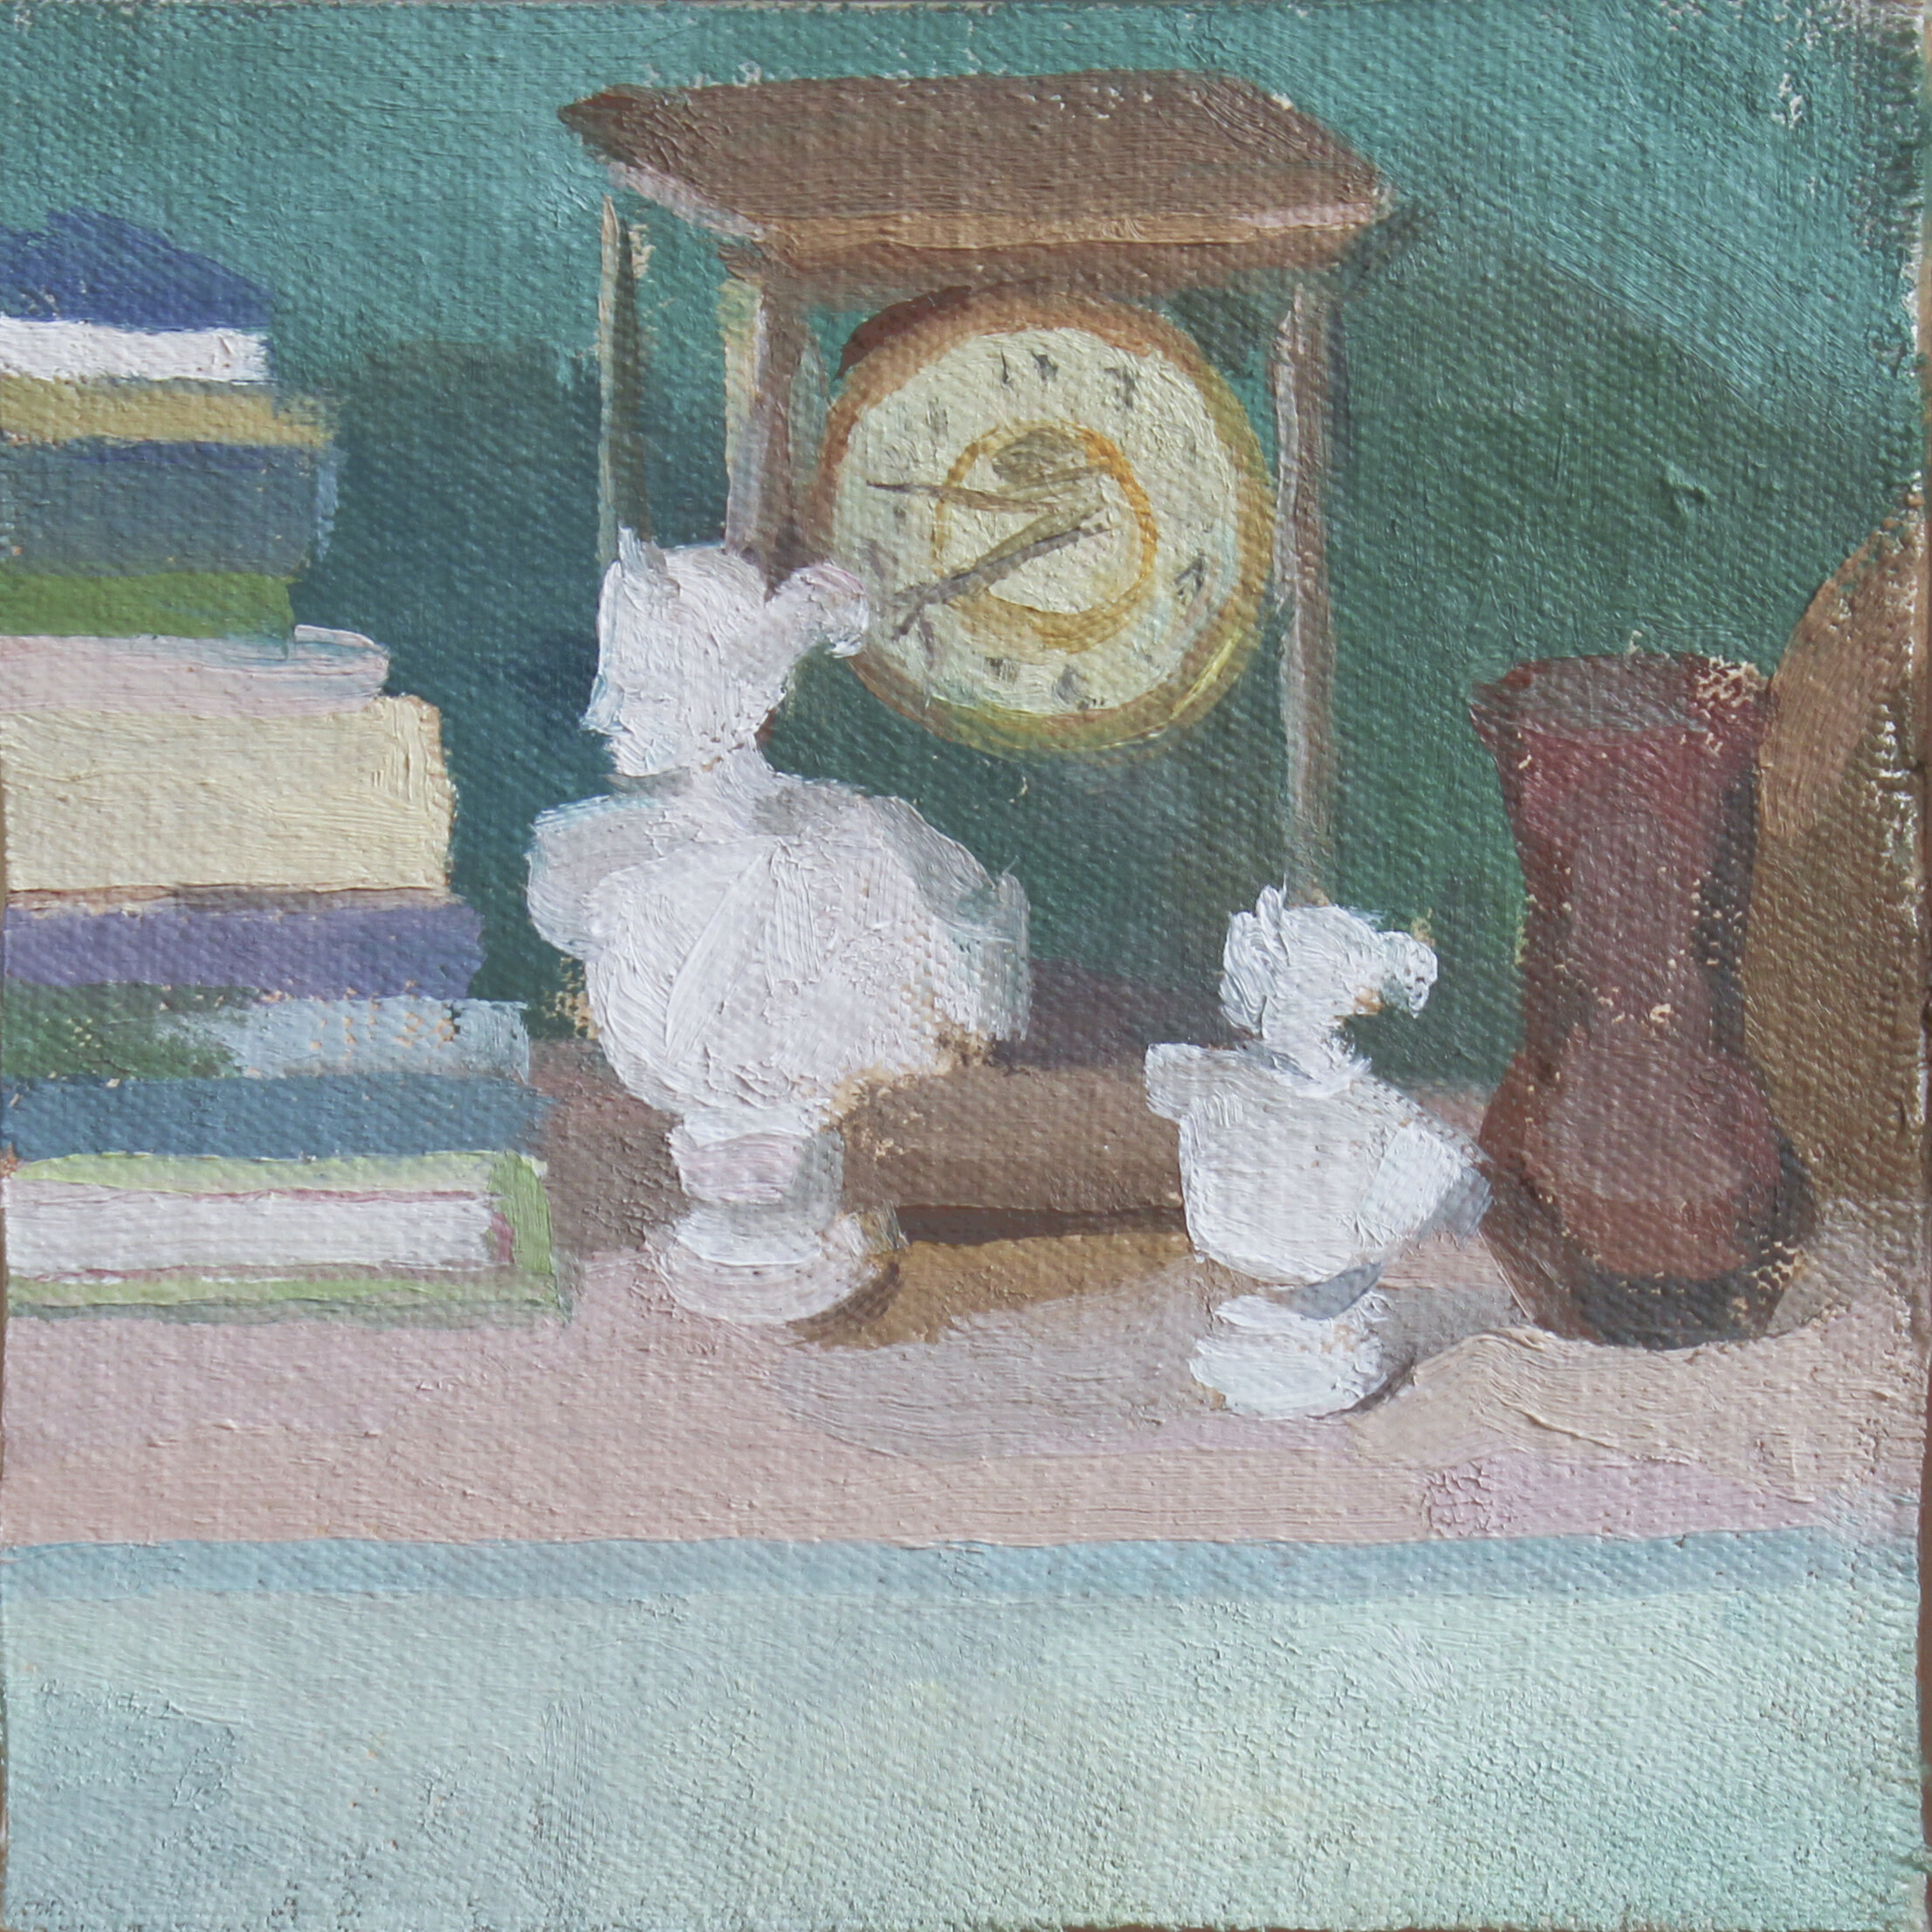    Still Life with Athena and Great Grandfather’s Clock   oil on mounted canvas 6 x 6” 2020  private collection Italy 